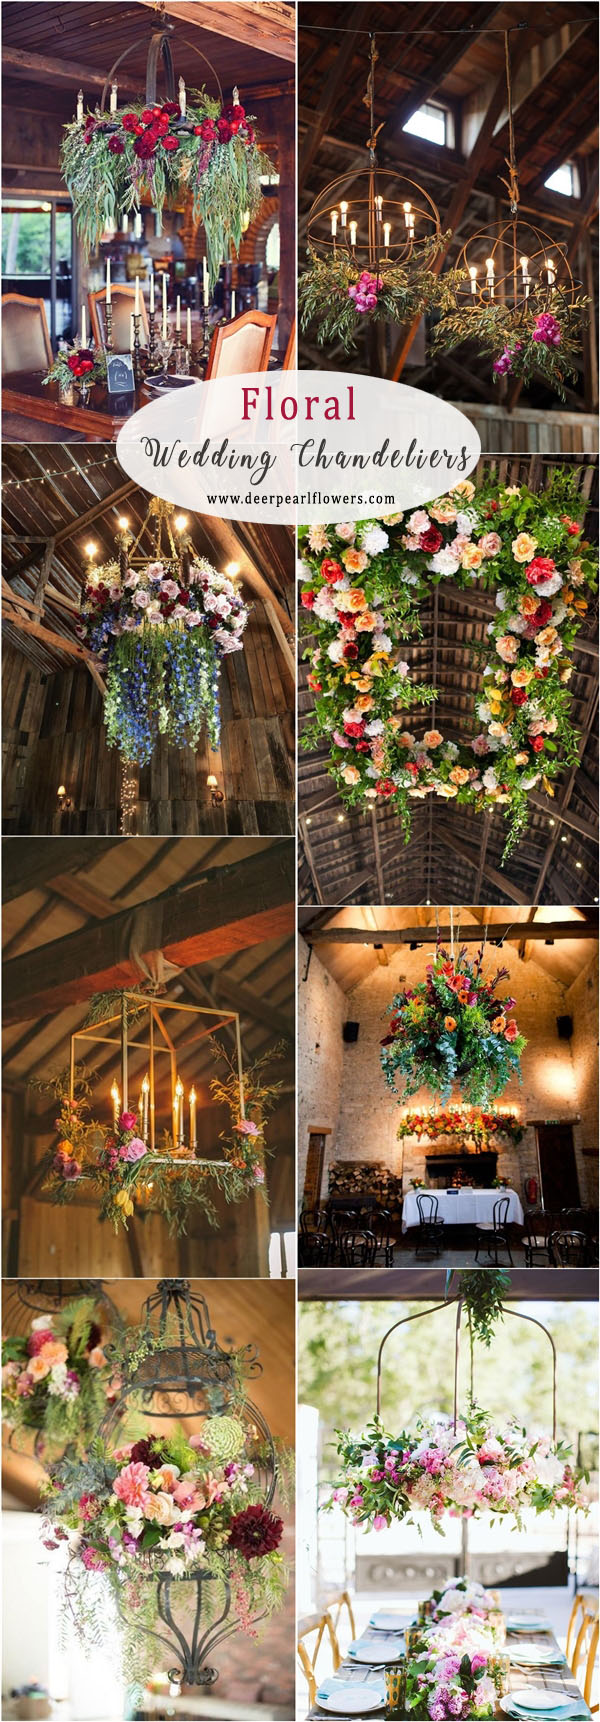 floral and greenery wedding chandelier decor ideas